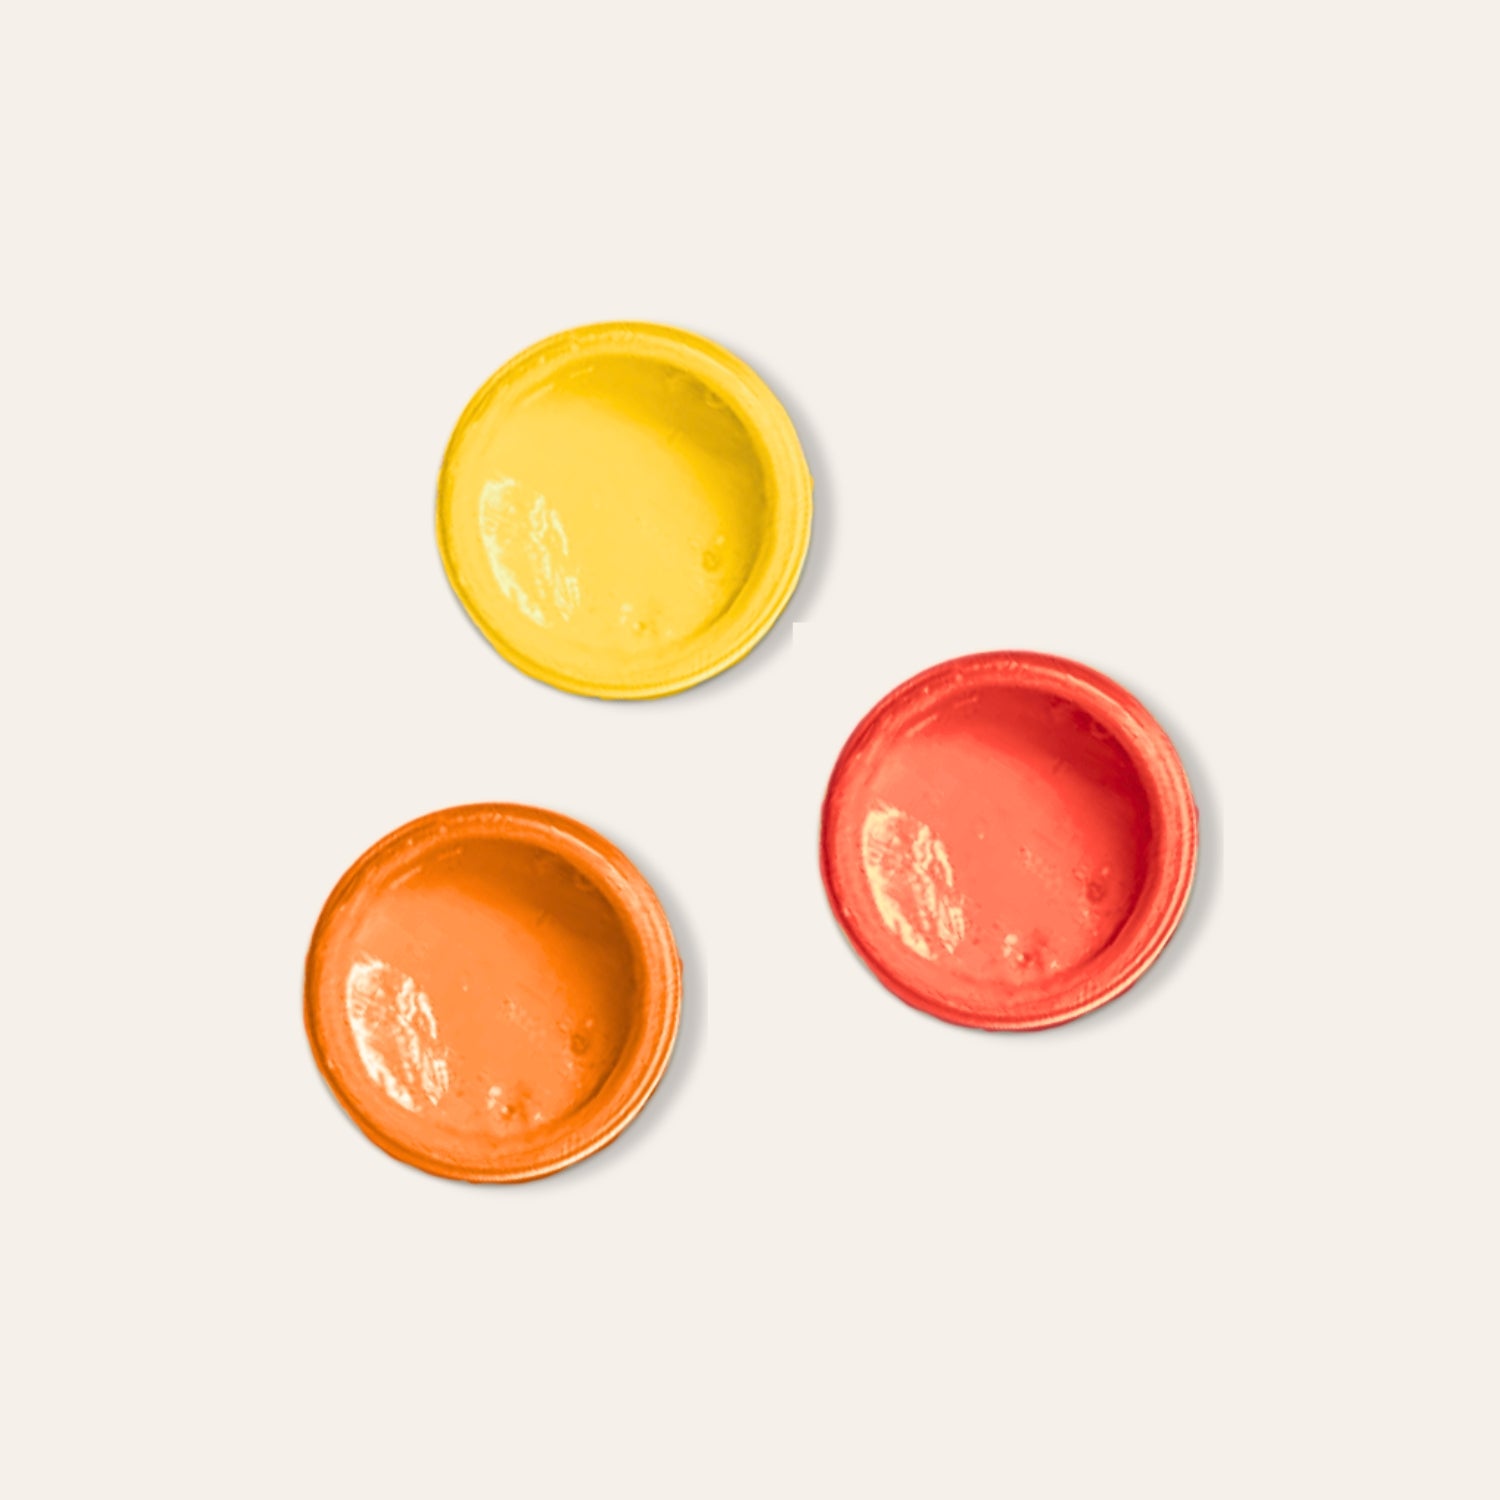 Air dry clay paint colours - yellow, orange, red.